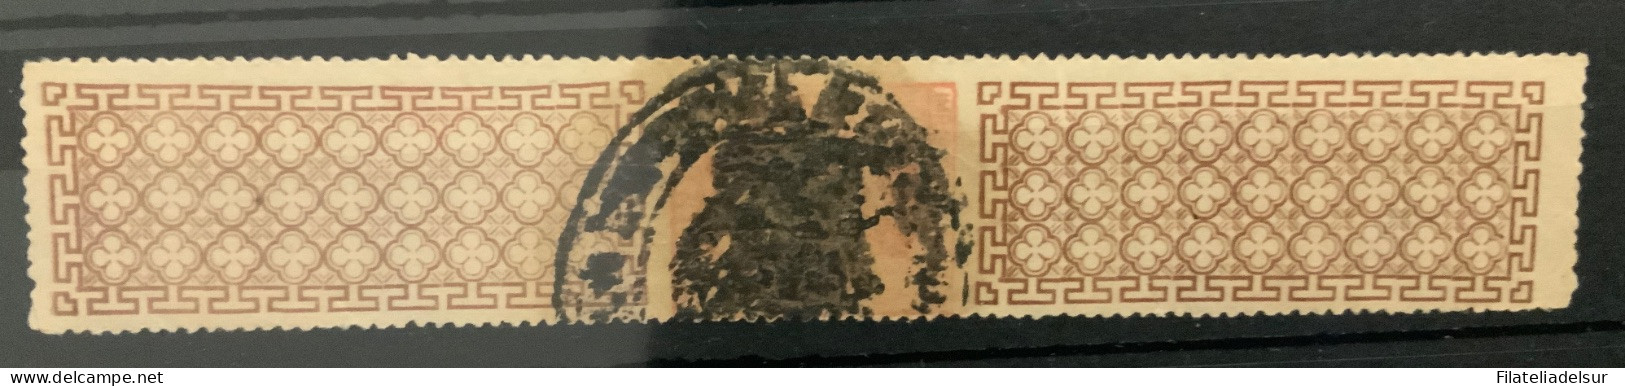 Fiscal - Postage-Revenue Stamps